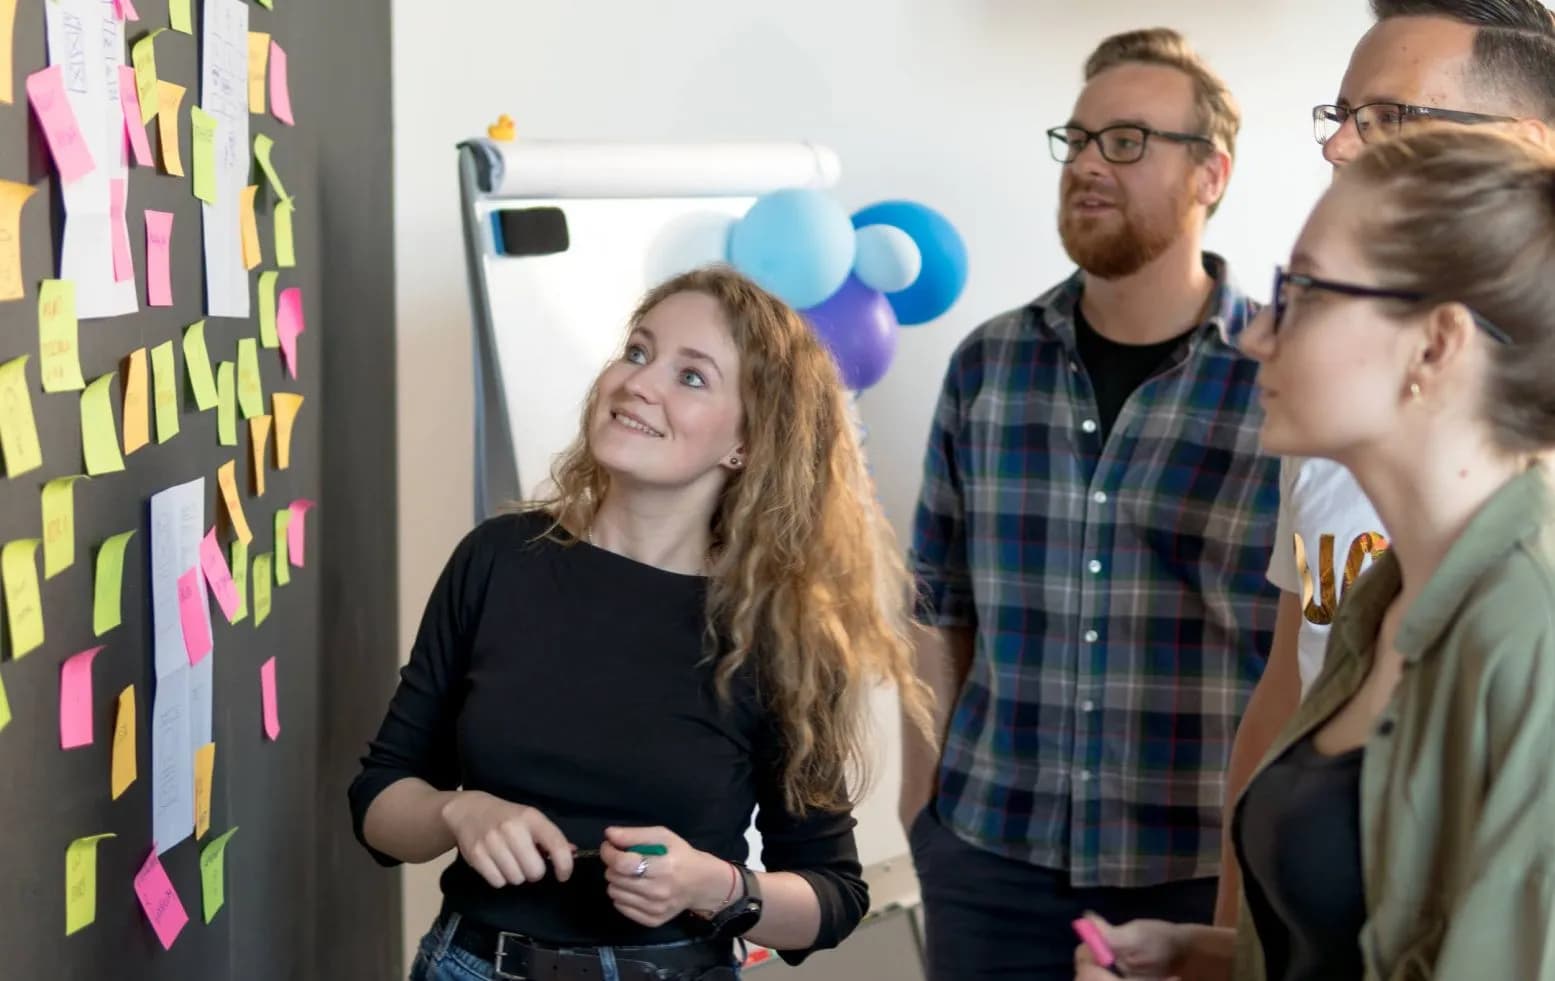 Four people looking at a black wall full of colourful sticky notes after a software development workshop